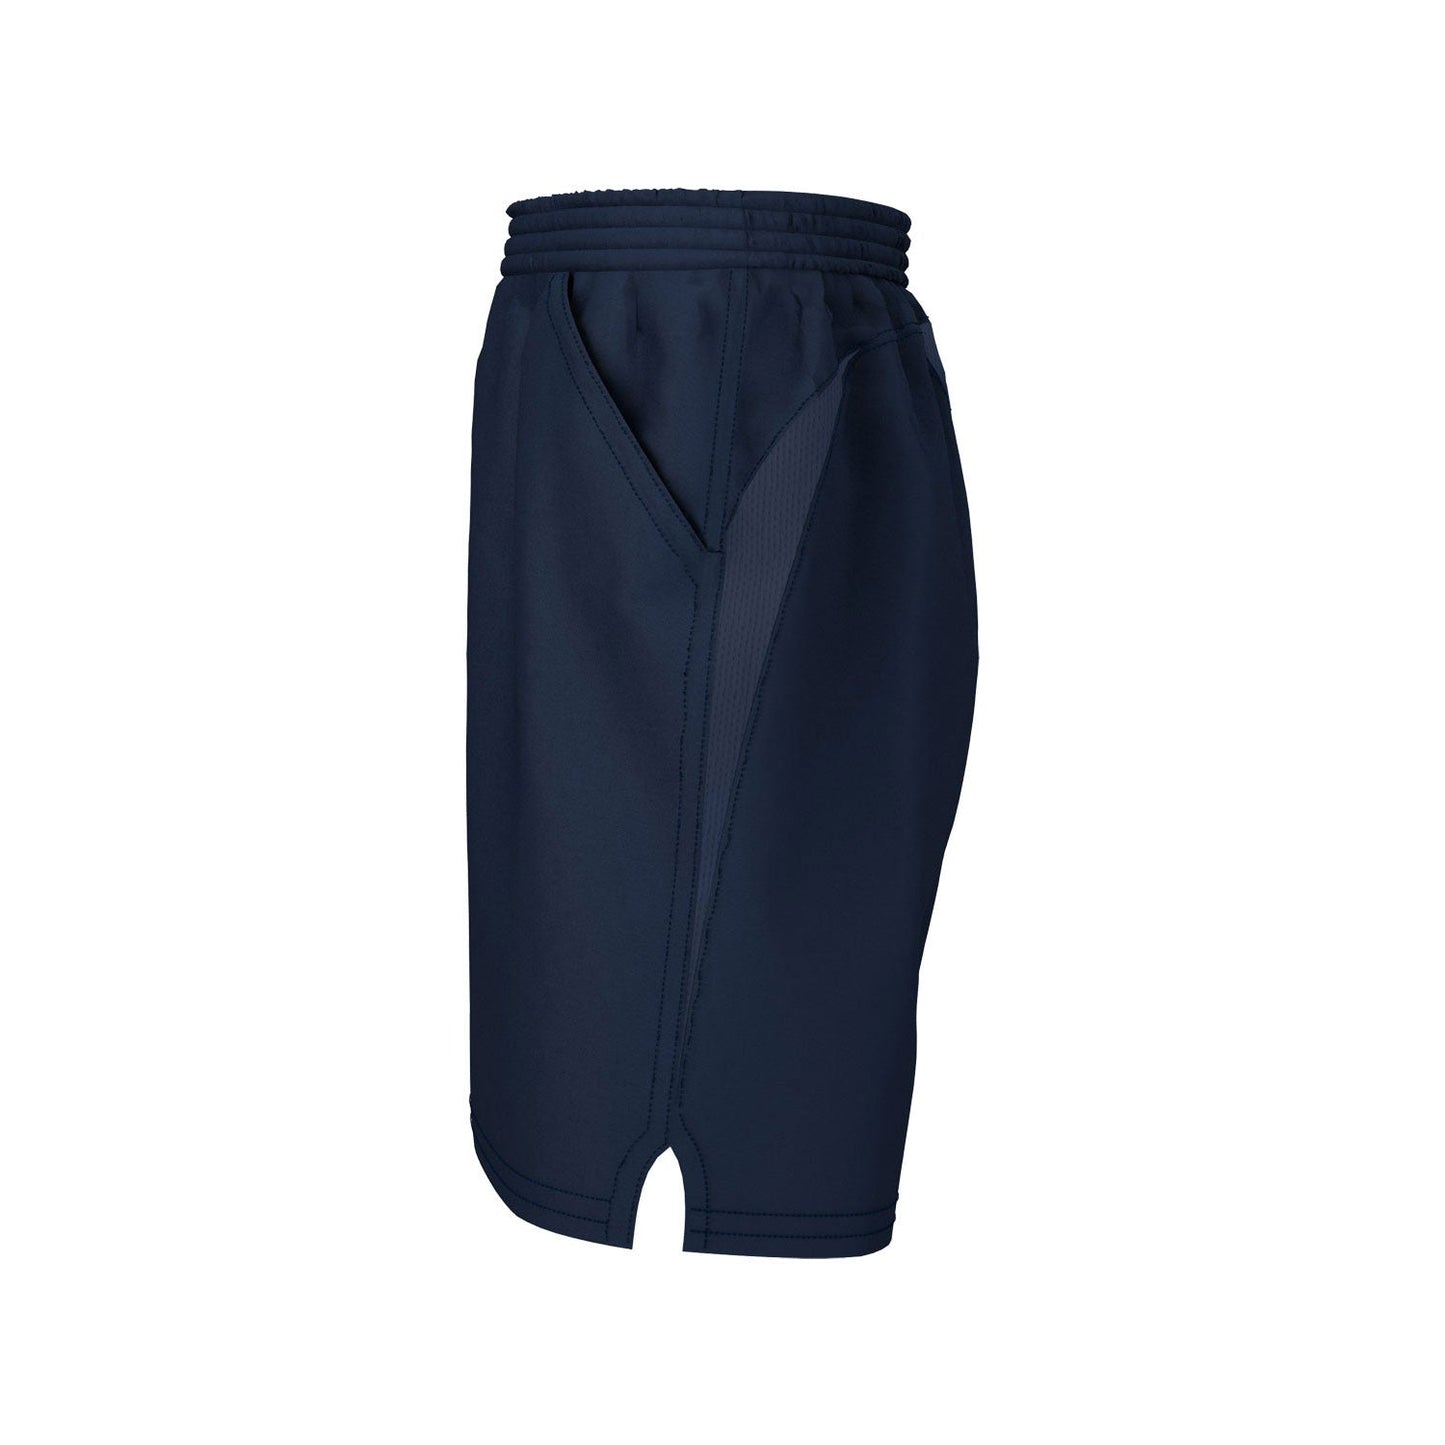 Lincoln College Training Shorts